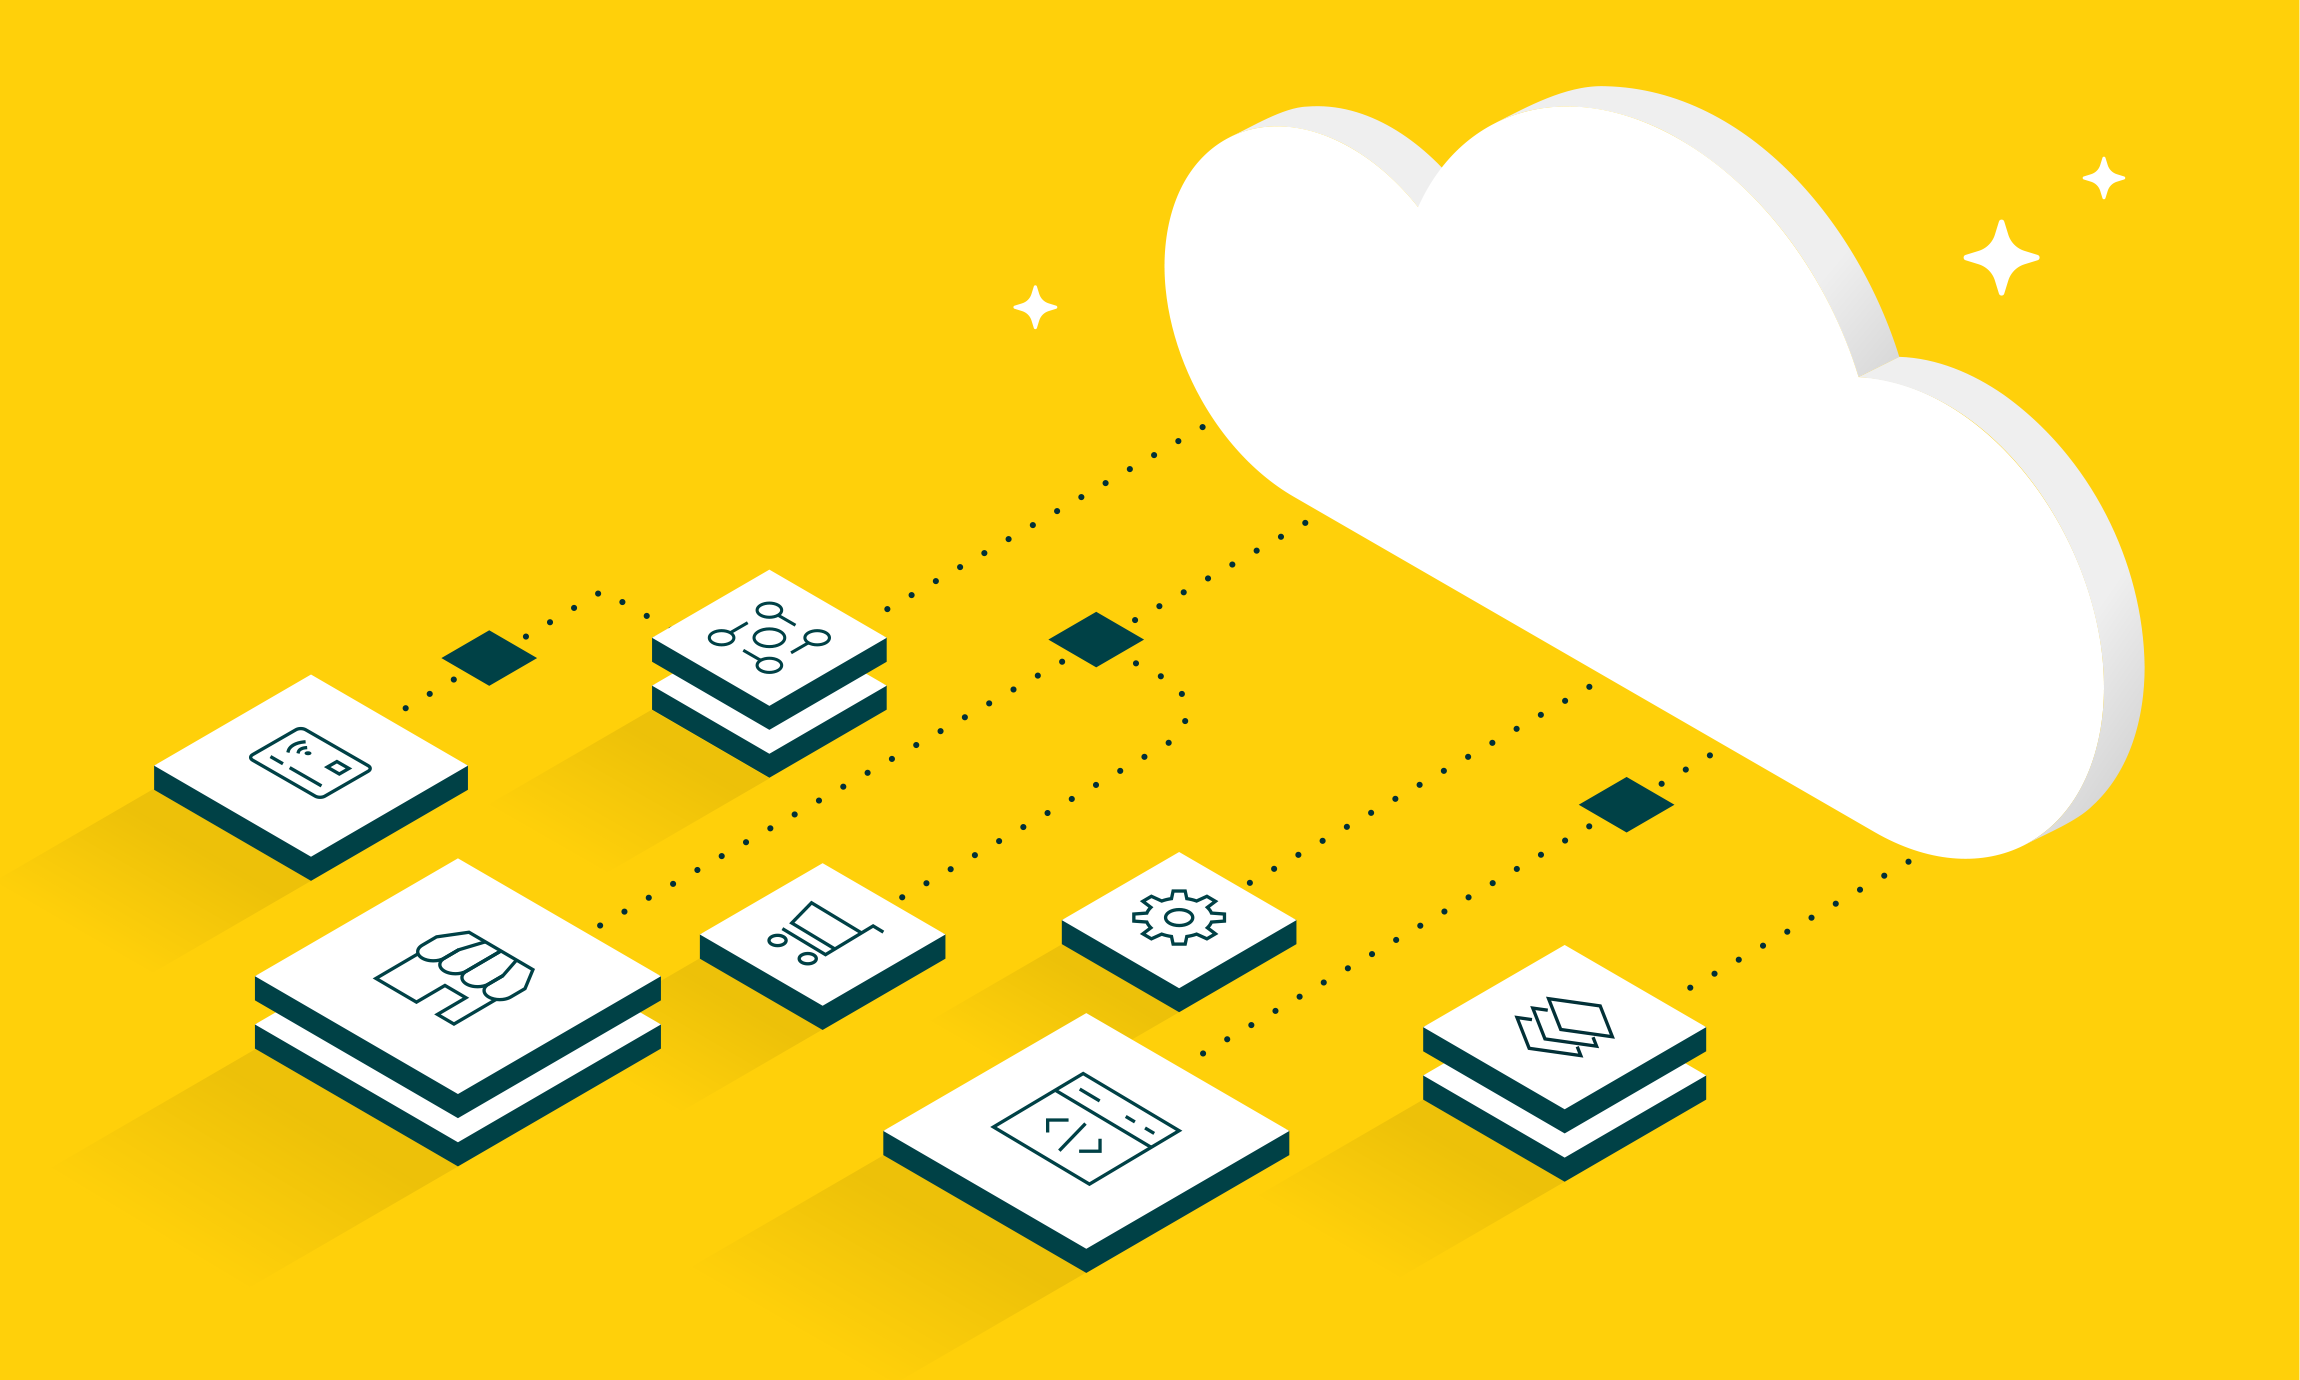 Why move your eCommerce stack to the cloud? Here are 6 top perks